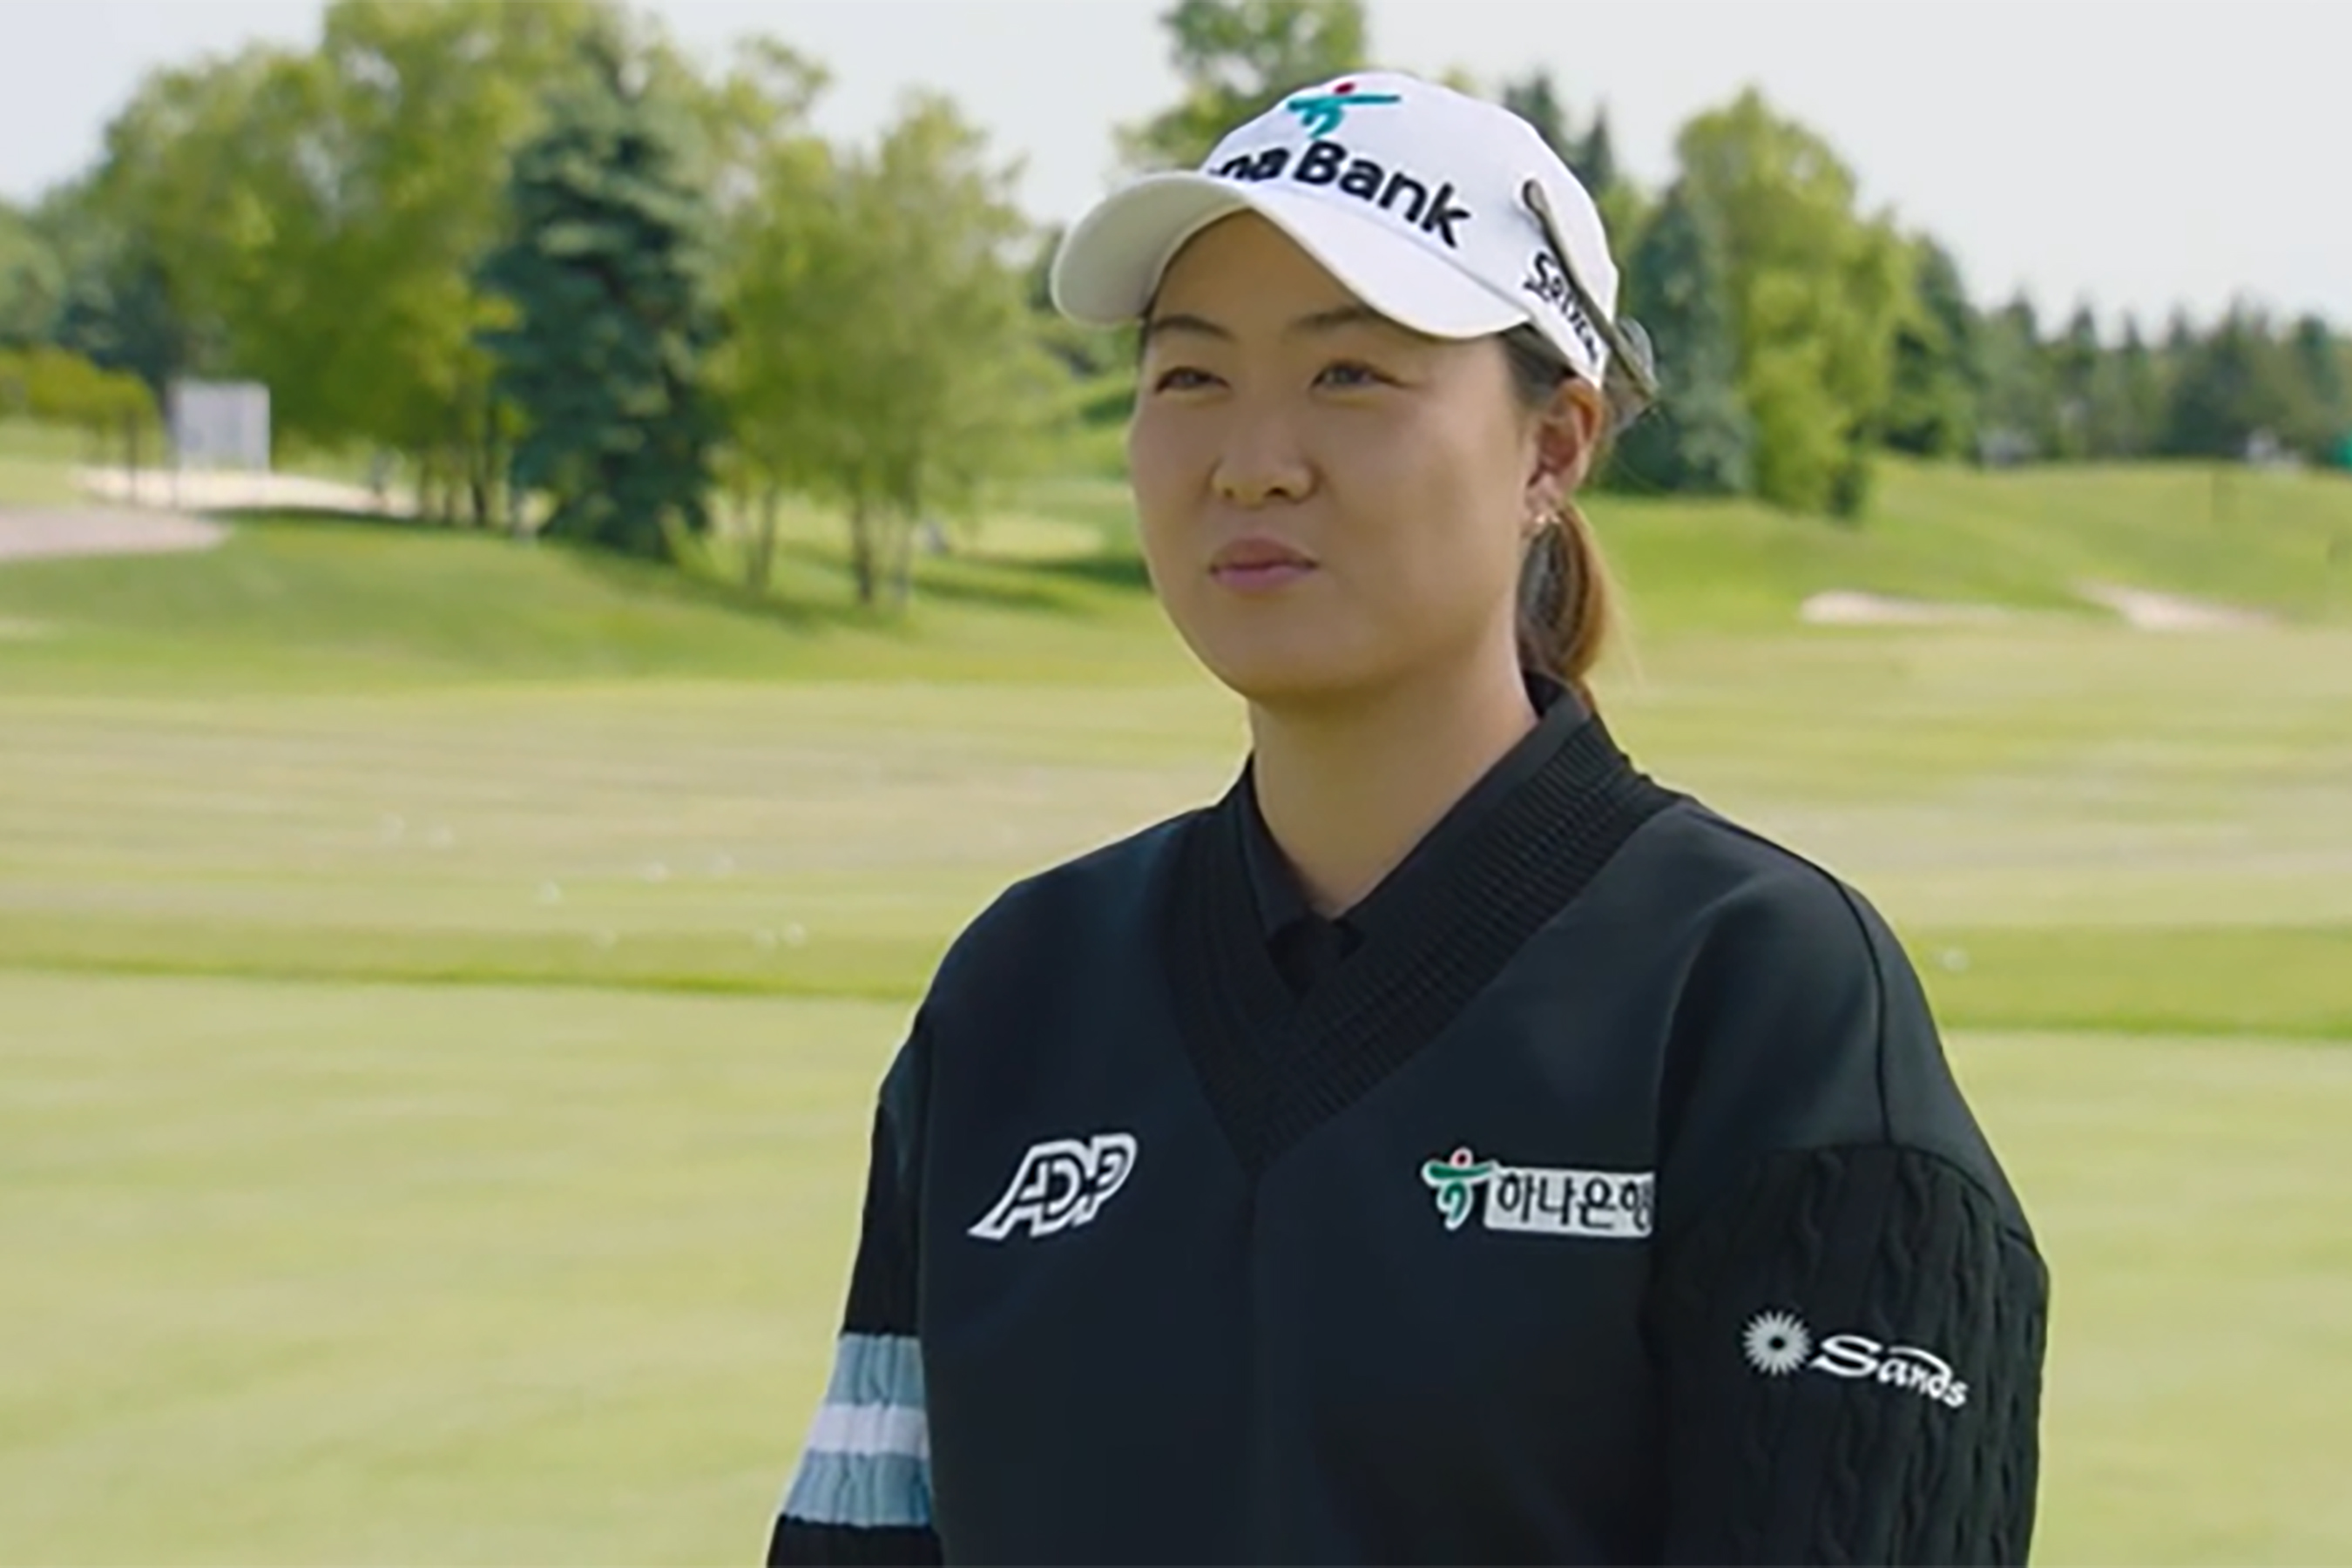 Play Video: Minjee Lee discusses brand ambassador role with Sands.